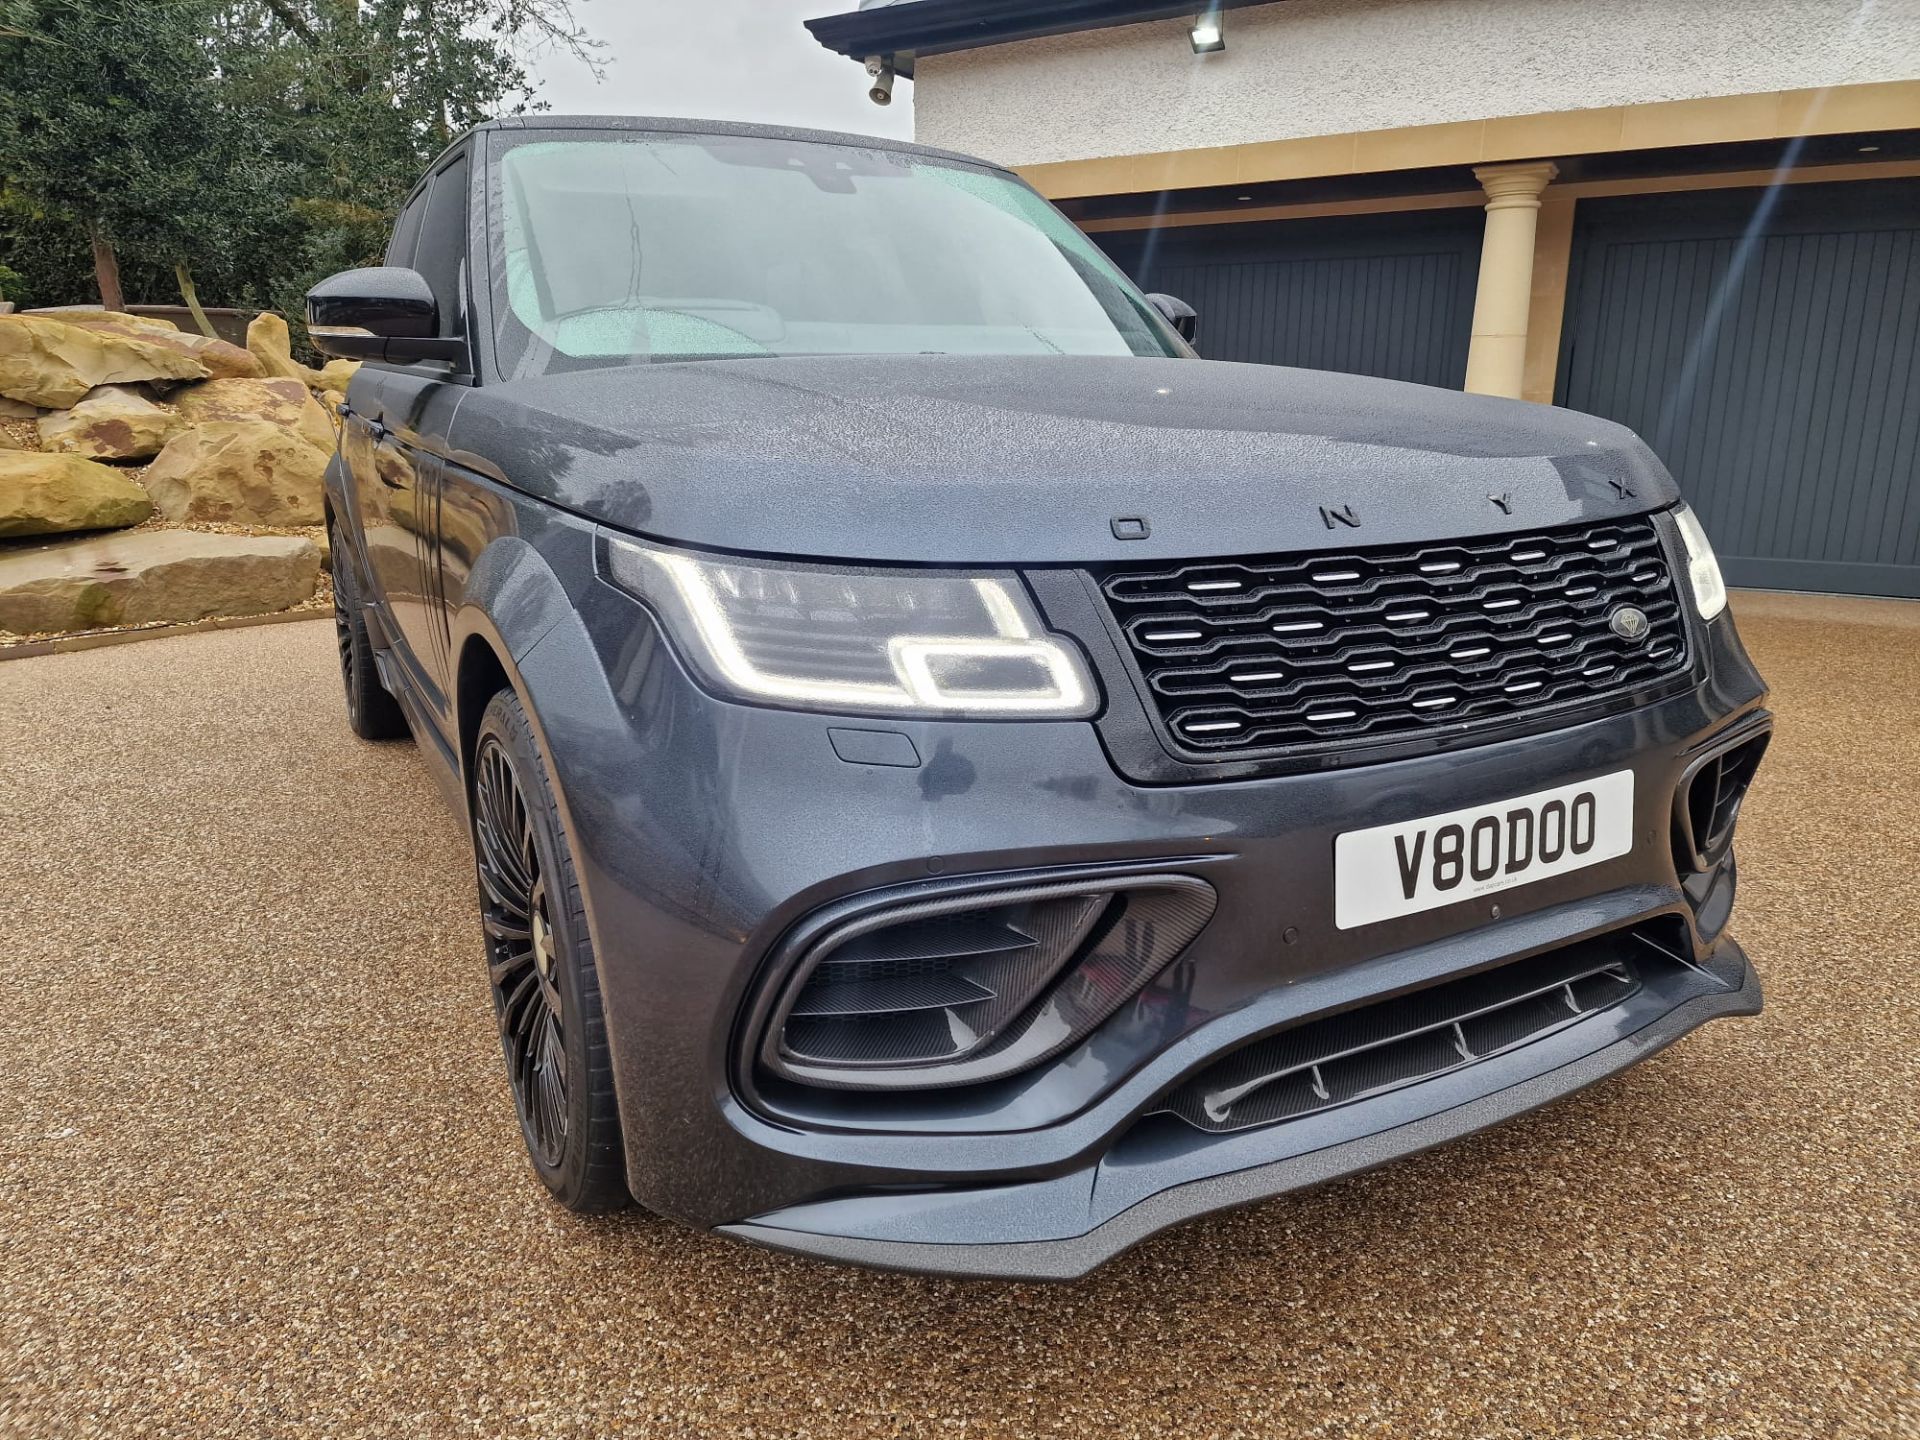 2018/68 RANGE ROVER SV AUTOBIOGRAPHY DYN V8 SC AUTO - £40K WORTH OF ONYX BODY KIT AND CONVERSION - Image 6 of 77